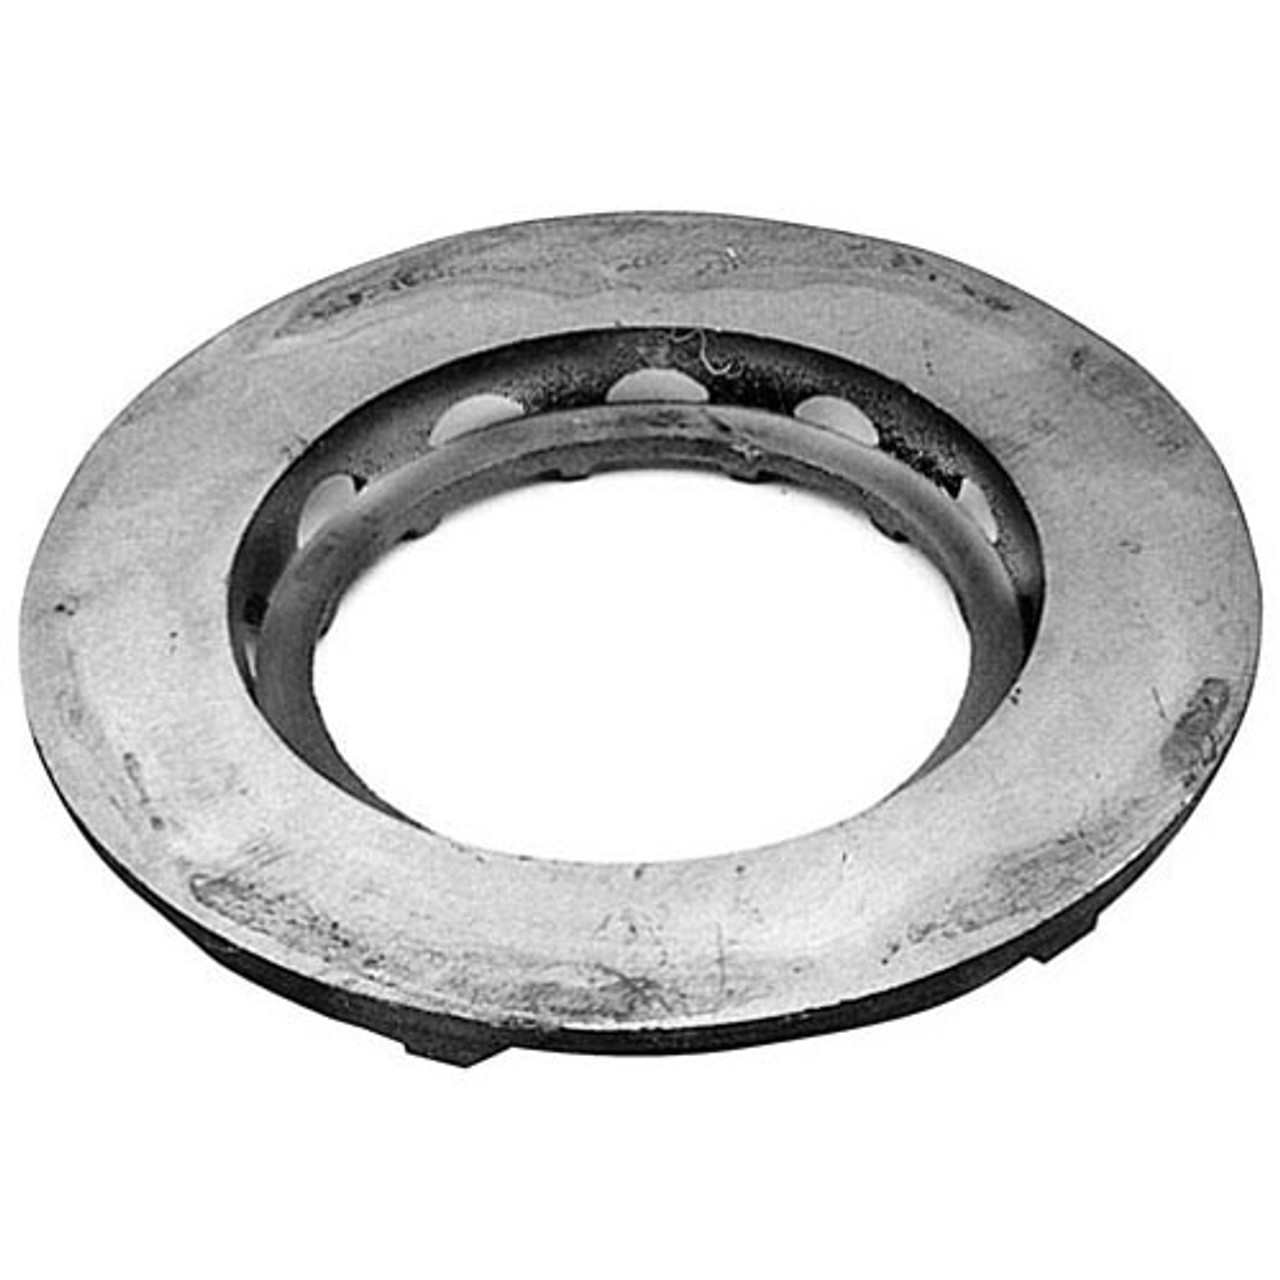 Ring 13-5/8 Od - Replacement Part For Vulcan Hart VH7940